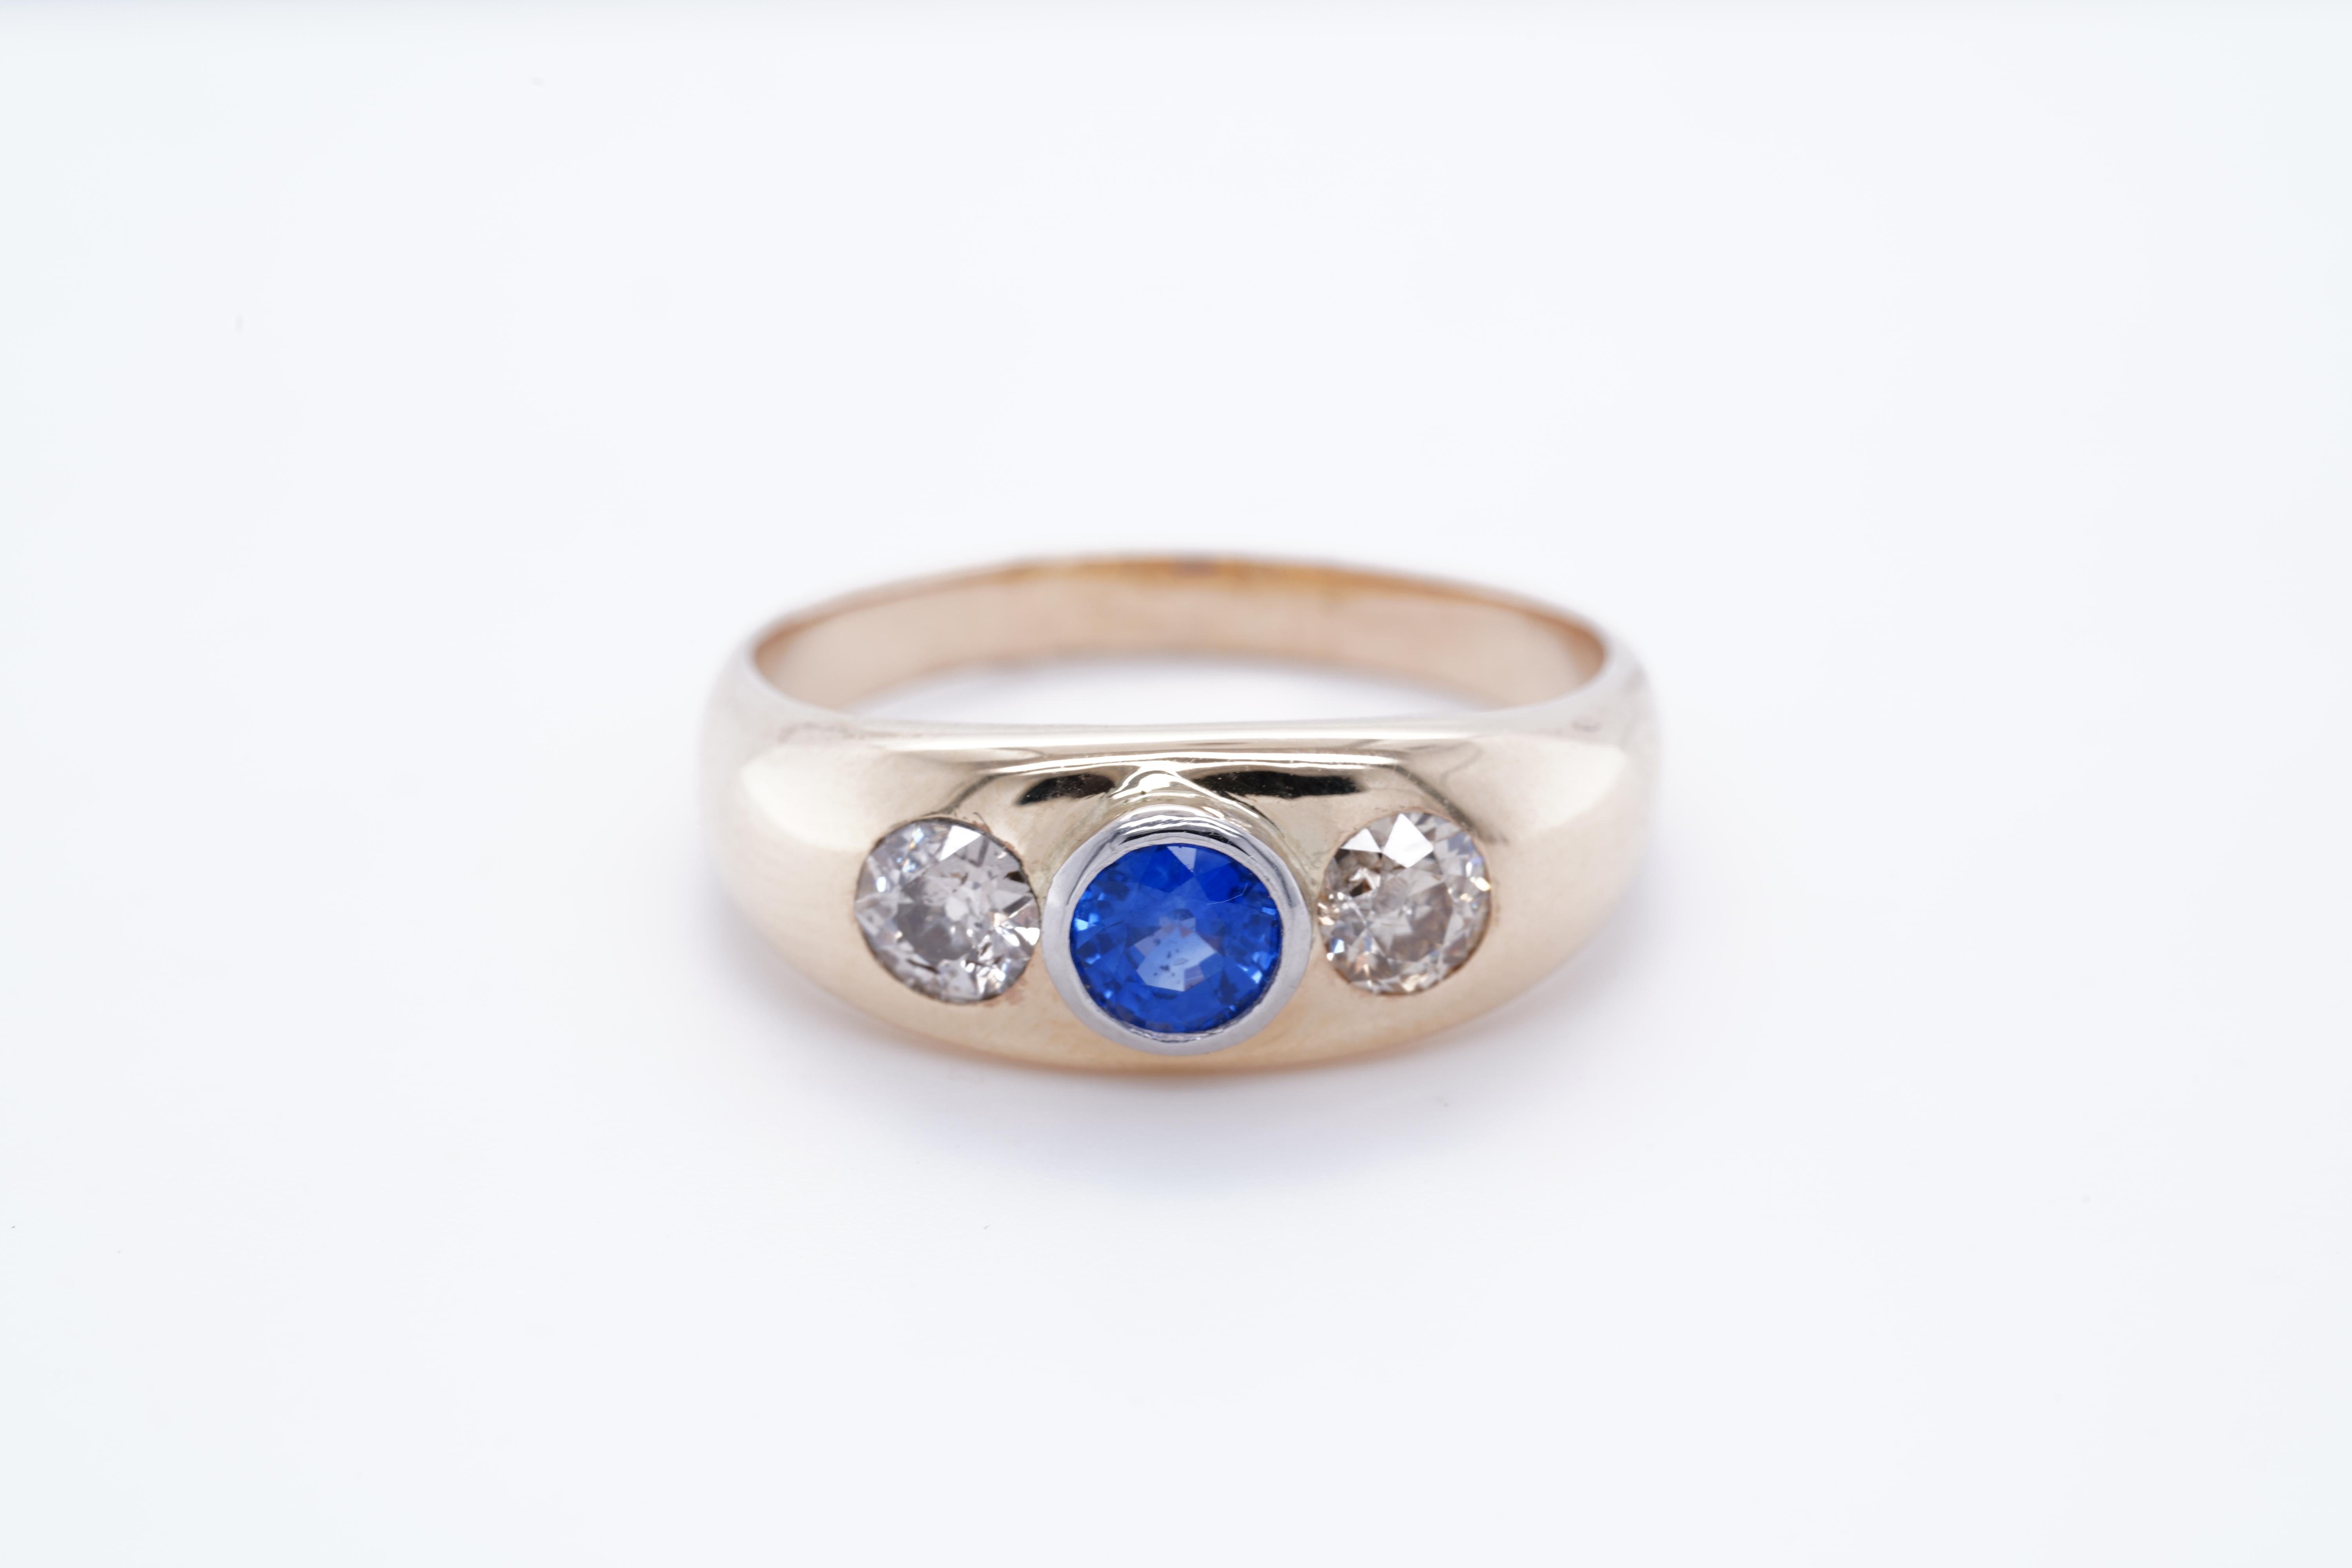 Sapphire and Diamond 14K Yellow Gold Unisex Triple Stone Ring.  14k yellow gold, one 5mm ocean blue sapphires, two 5mm diamonds on either side.  September's perfect birthday, birthstone ring. Perfect men's wedding band.